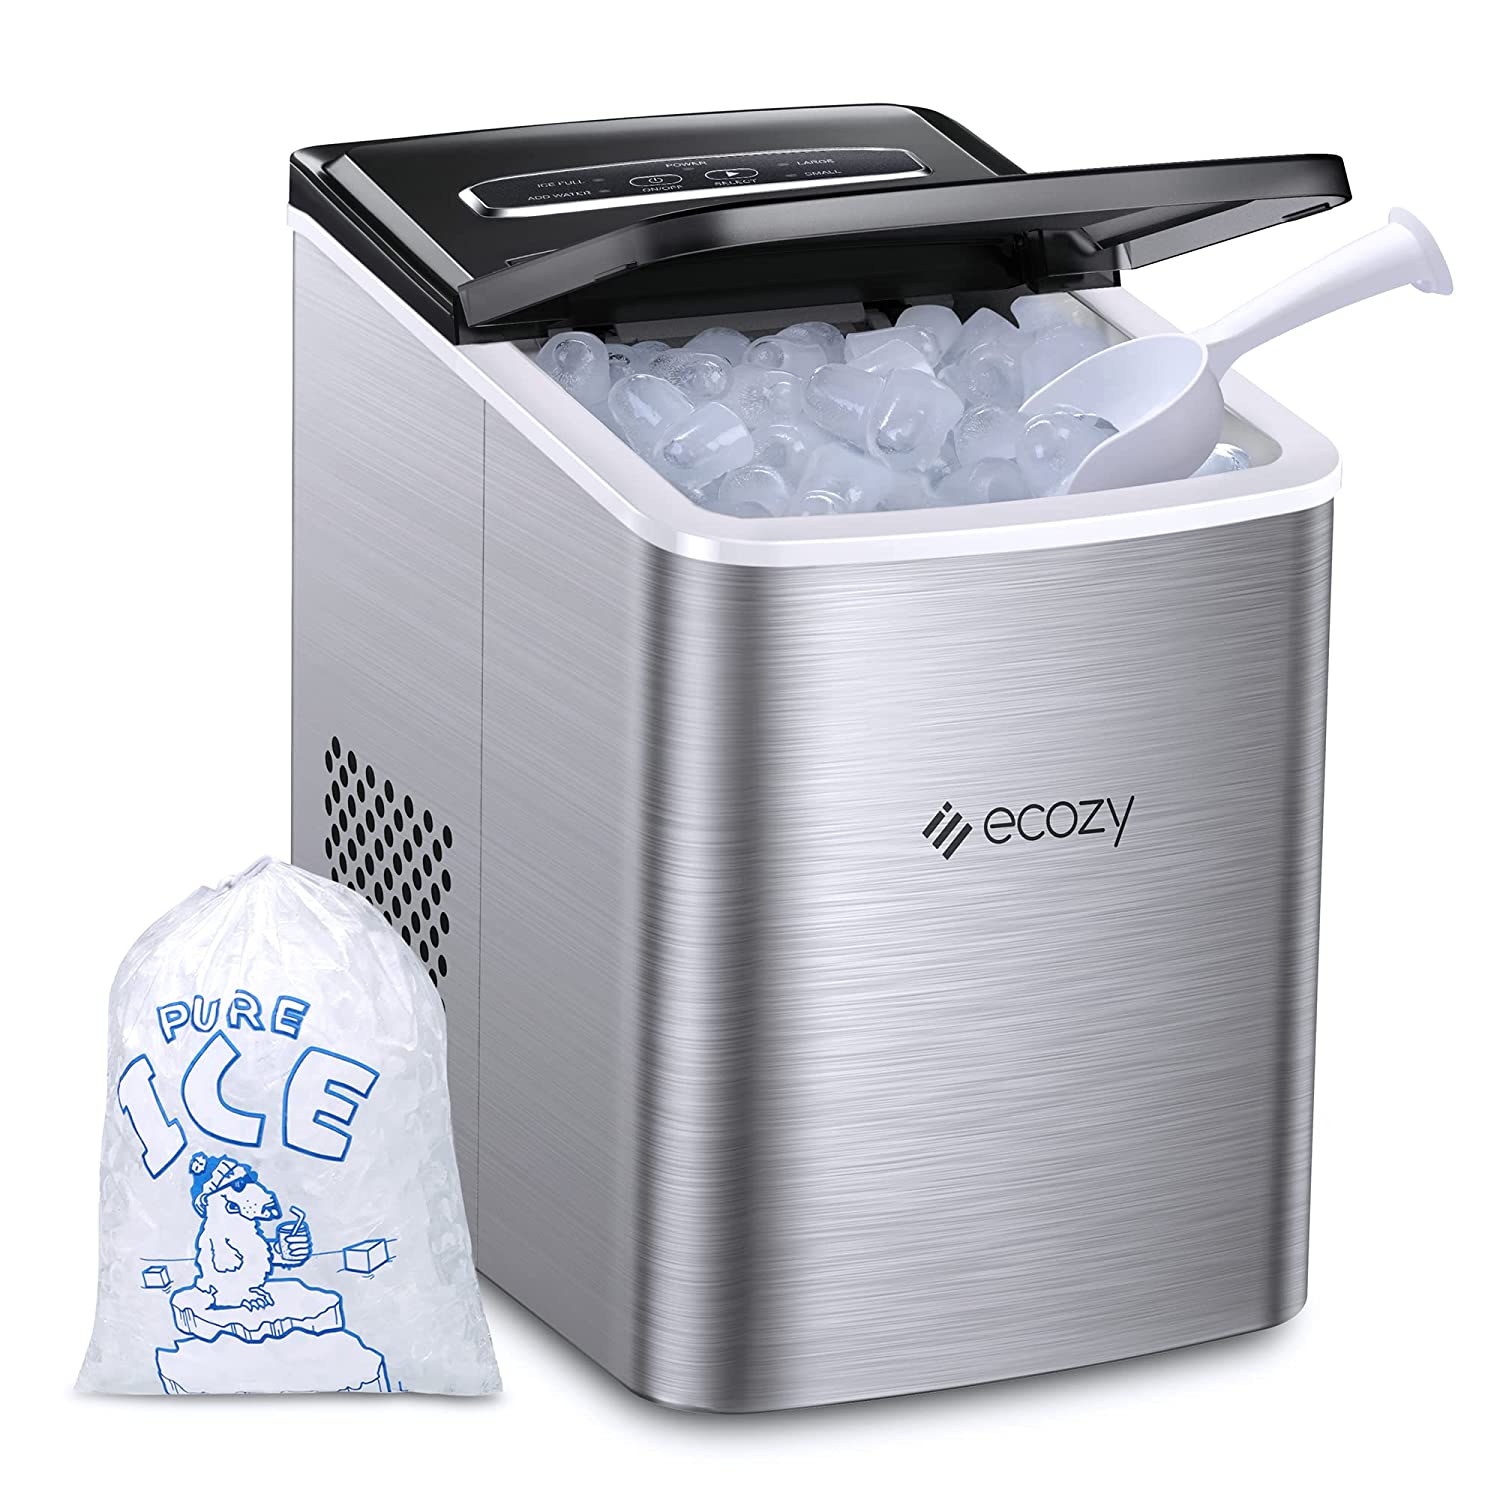 Ecozy nugget ice maker for your countertop! You can find it in my ama